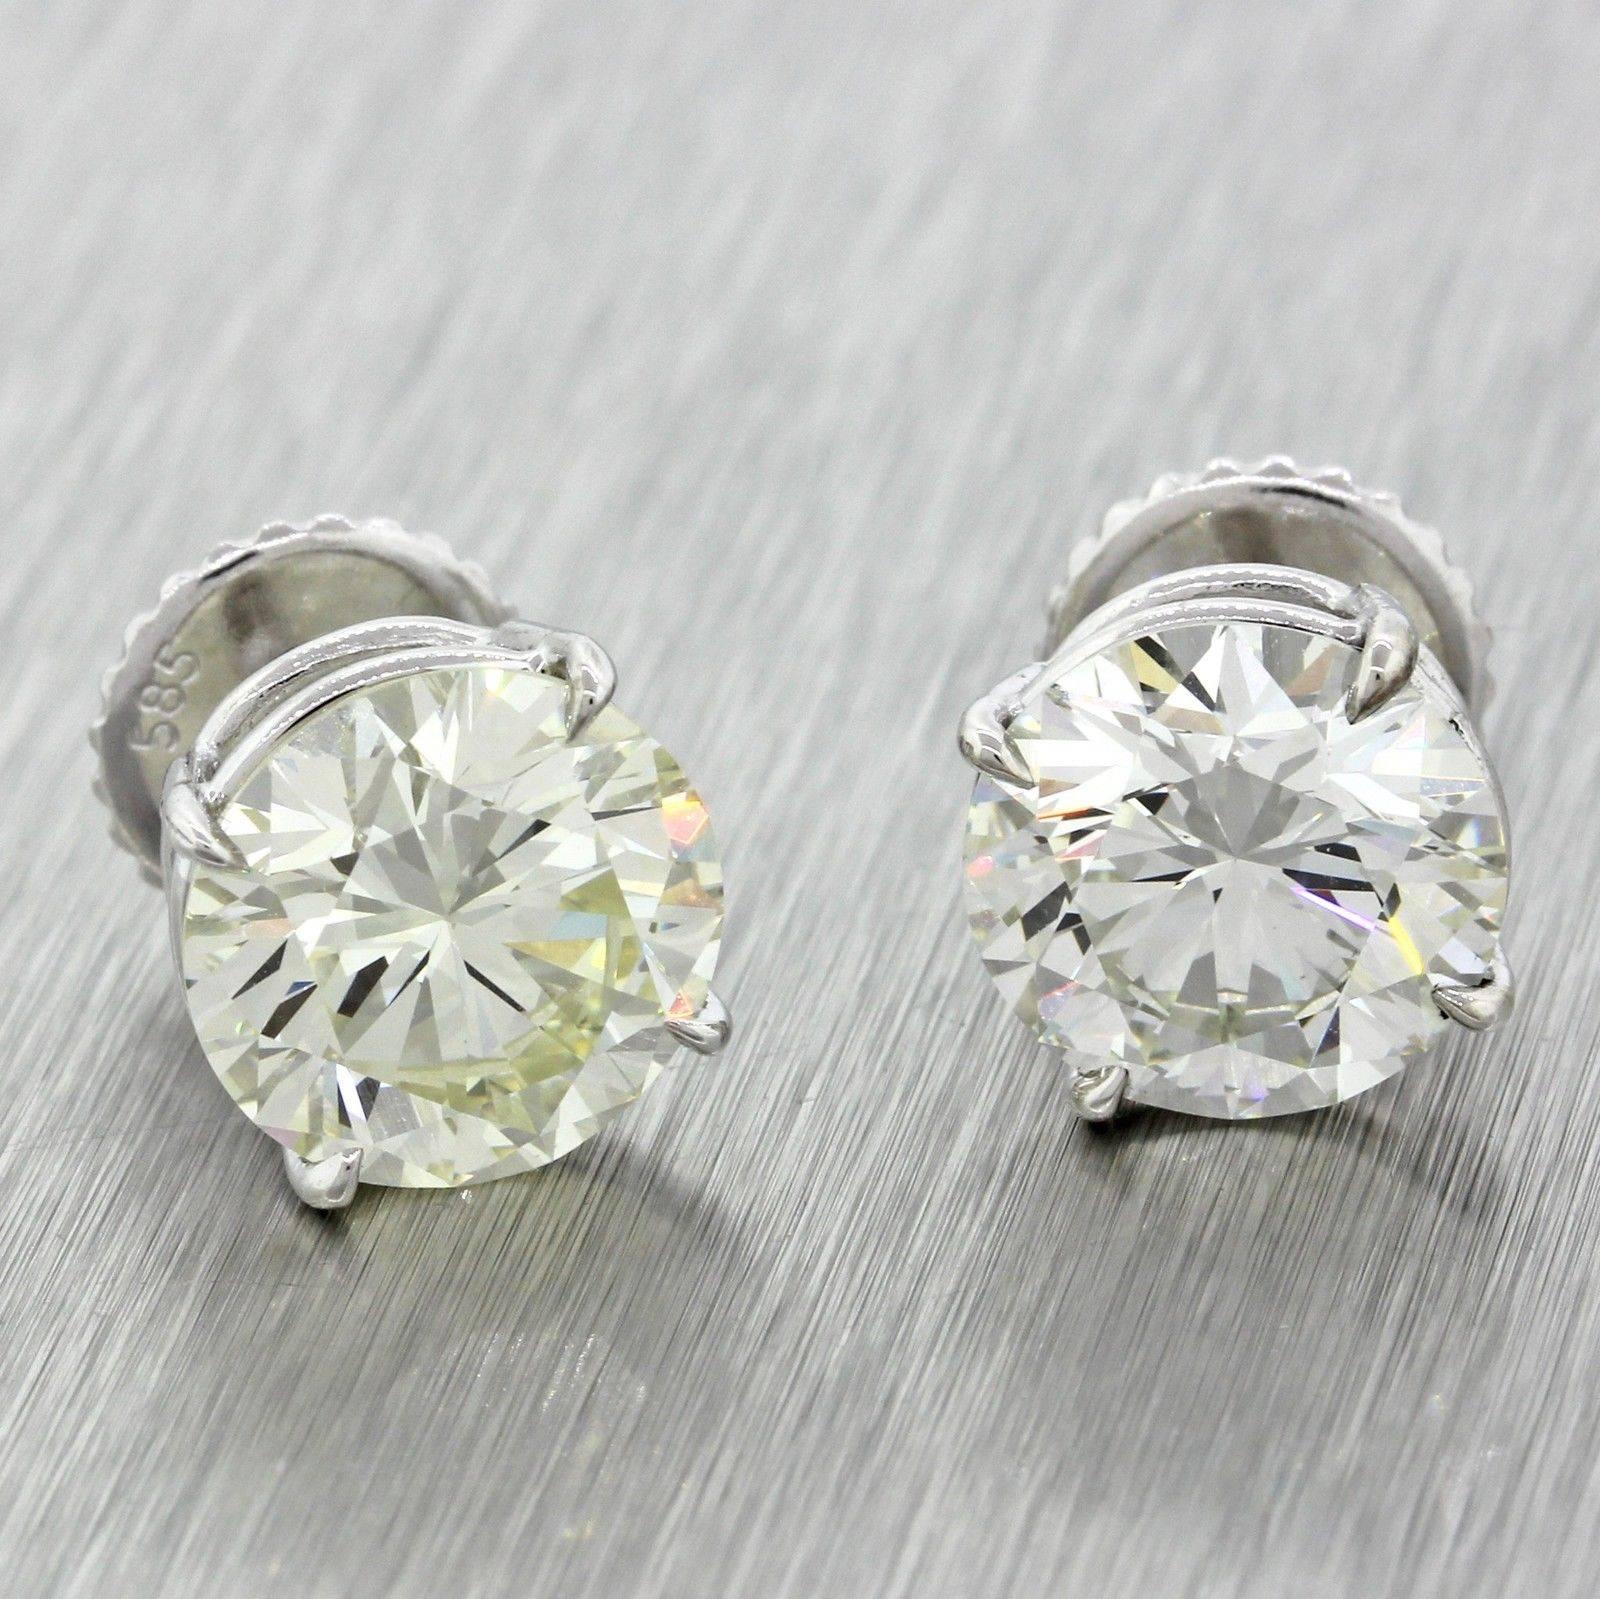 This is a beautiful pair of HUGE Modern Estate 14k Solid White Gold 7.76ctw Diamond Stud Earrings GIA EGL. It will come professionally packaged in a Collectors Coins & Jewelry gift presentation box.

Gender 	Women's
Stone Type 	GIA Diamond - Round